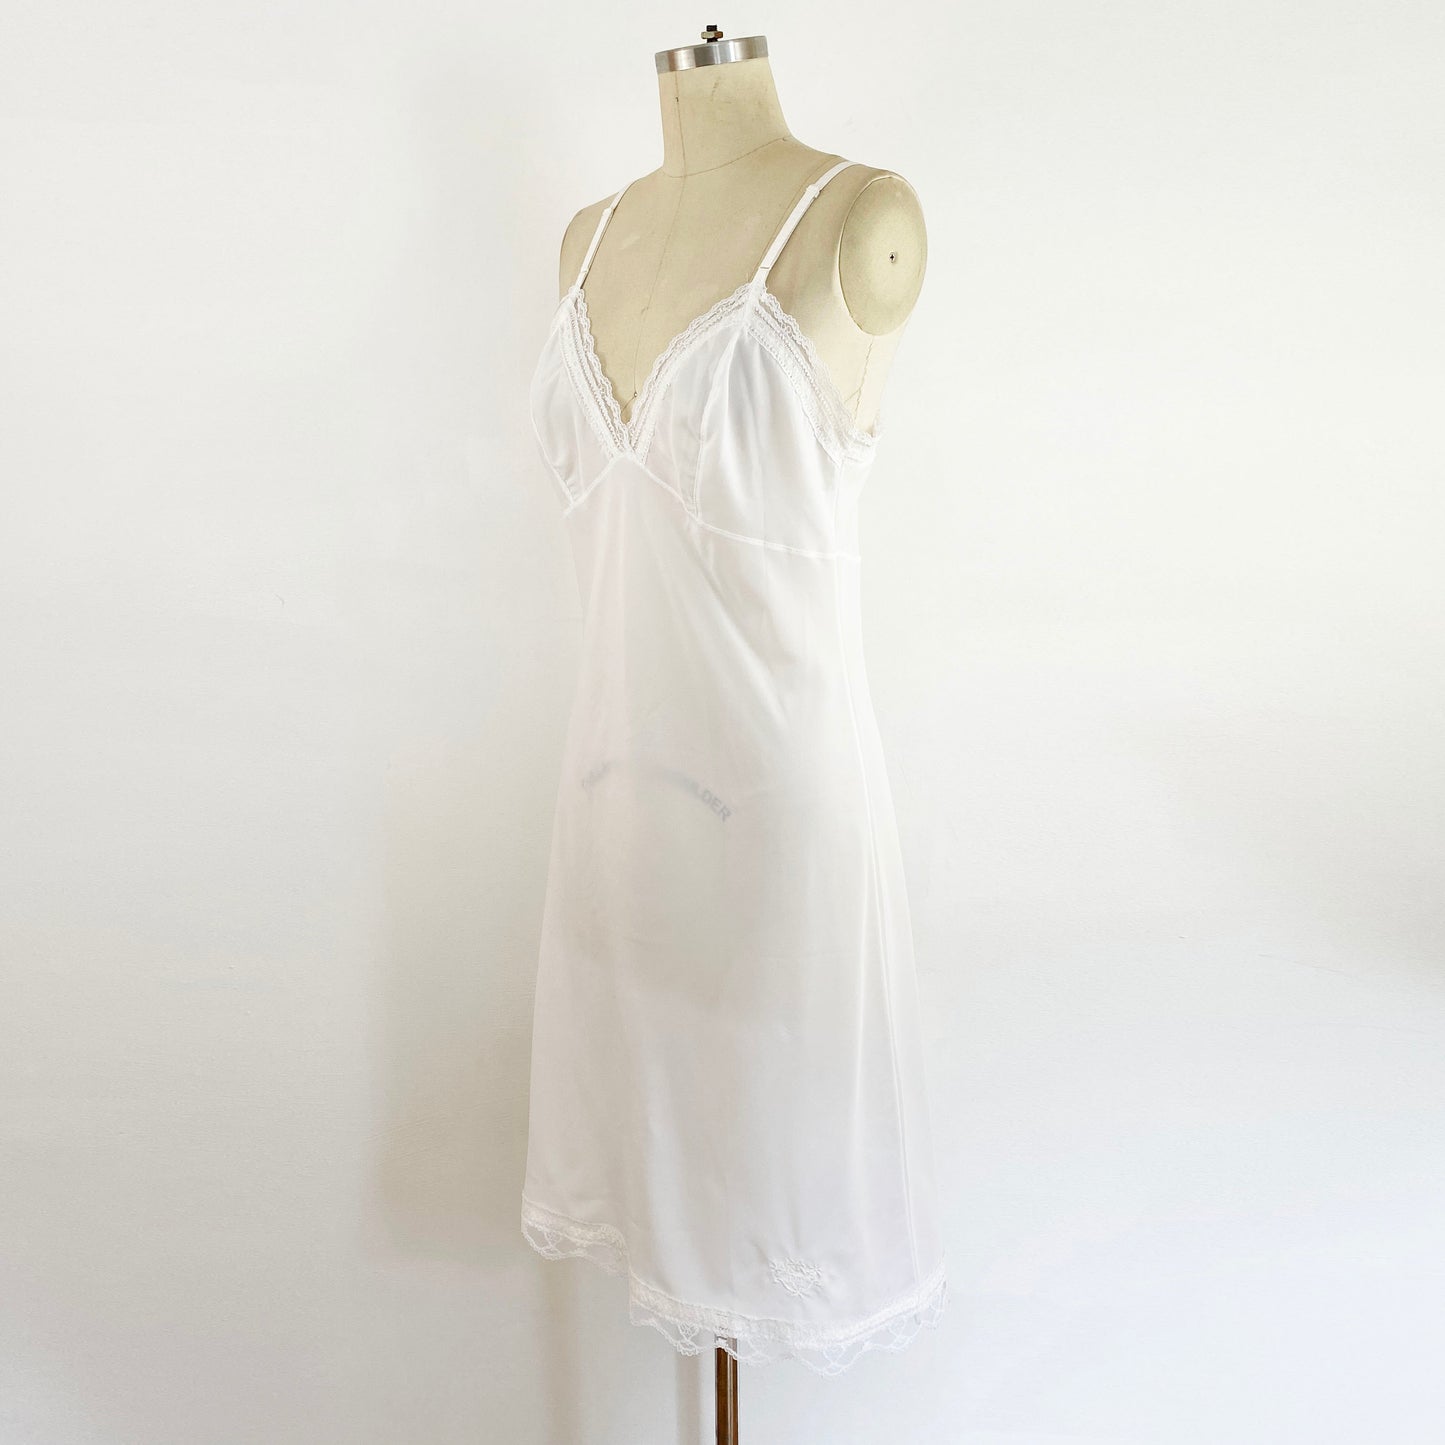 1980s Christian Dior White Embroidered and Lace Slip Dress Chemise Lingerie Nightgown / Size 36 Medium 8